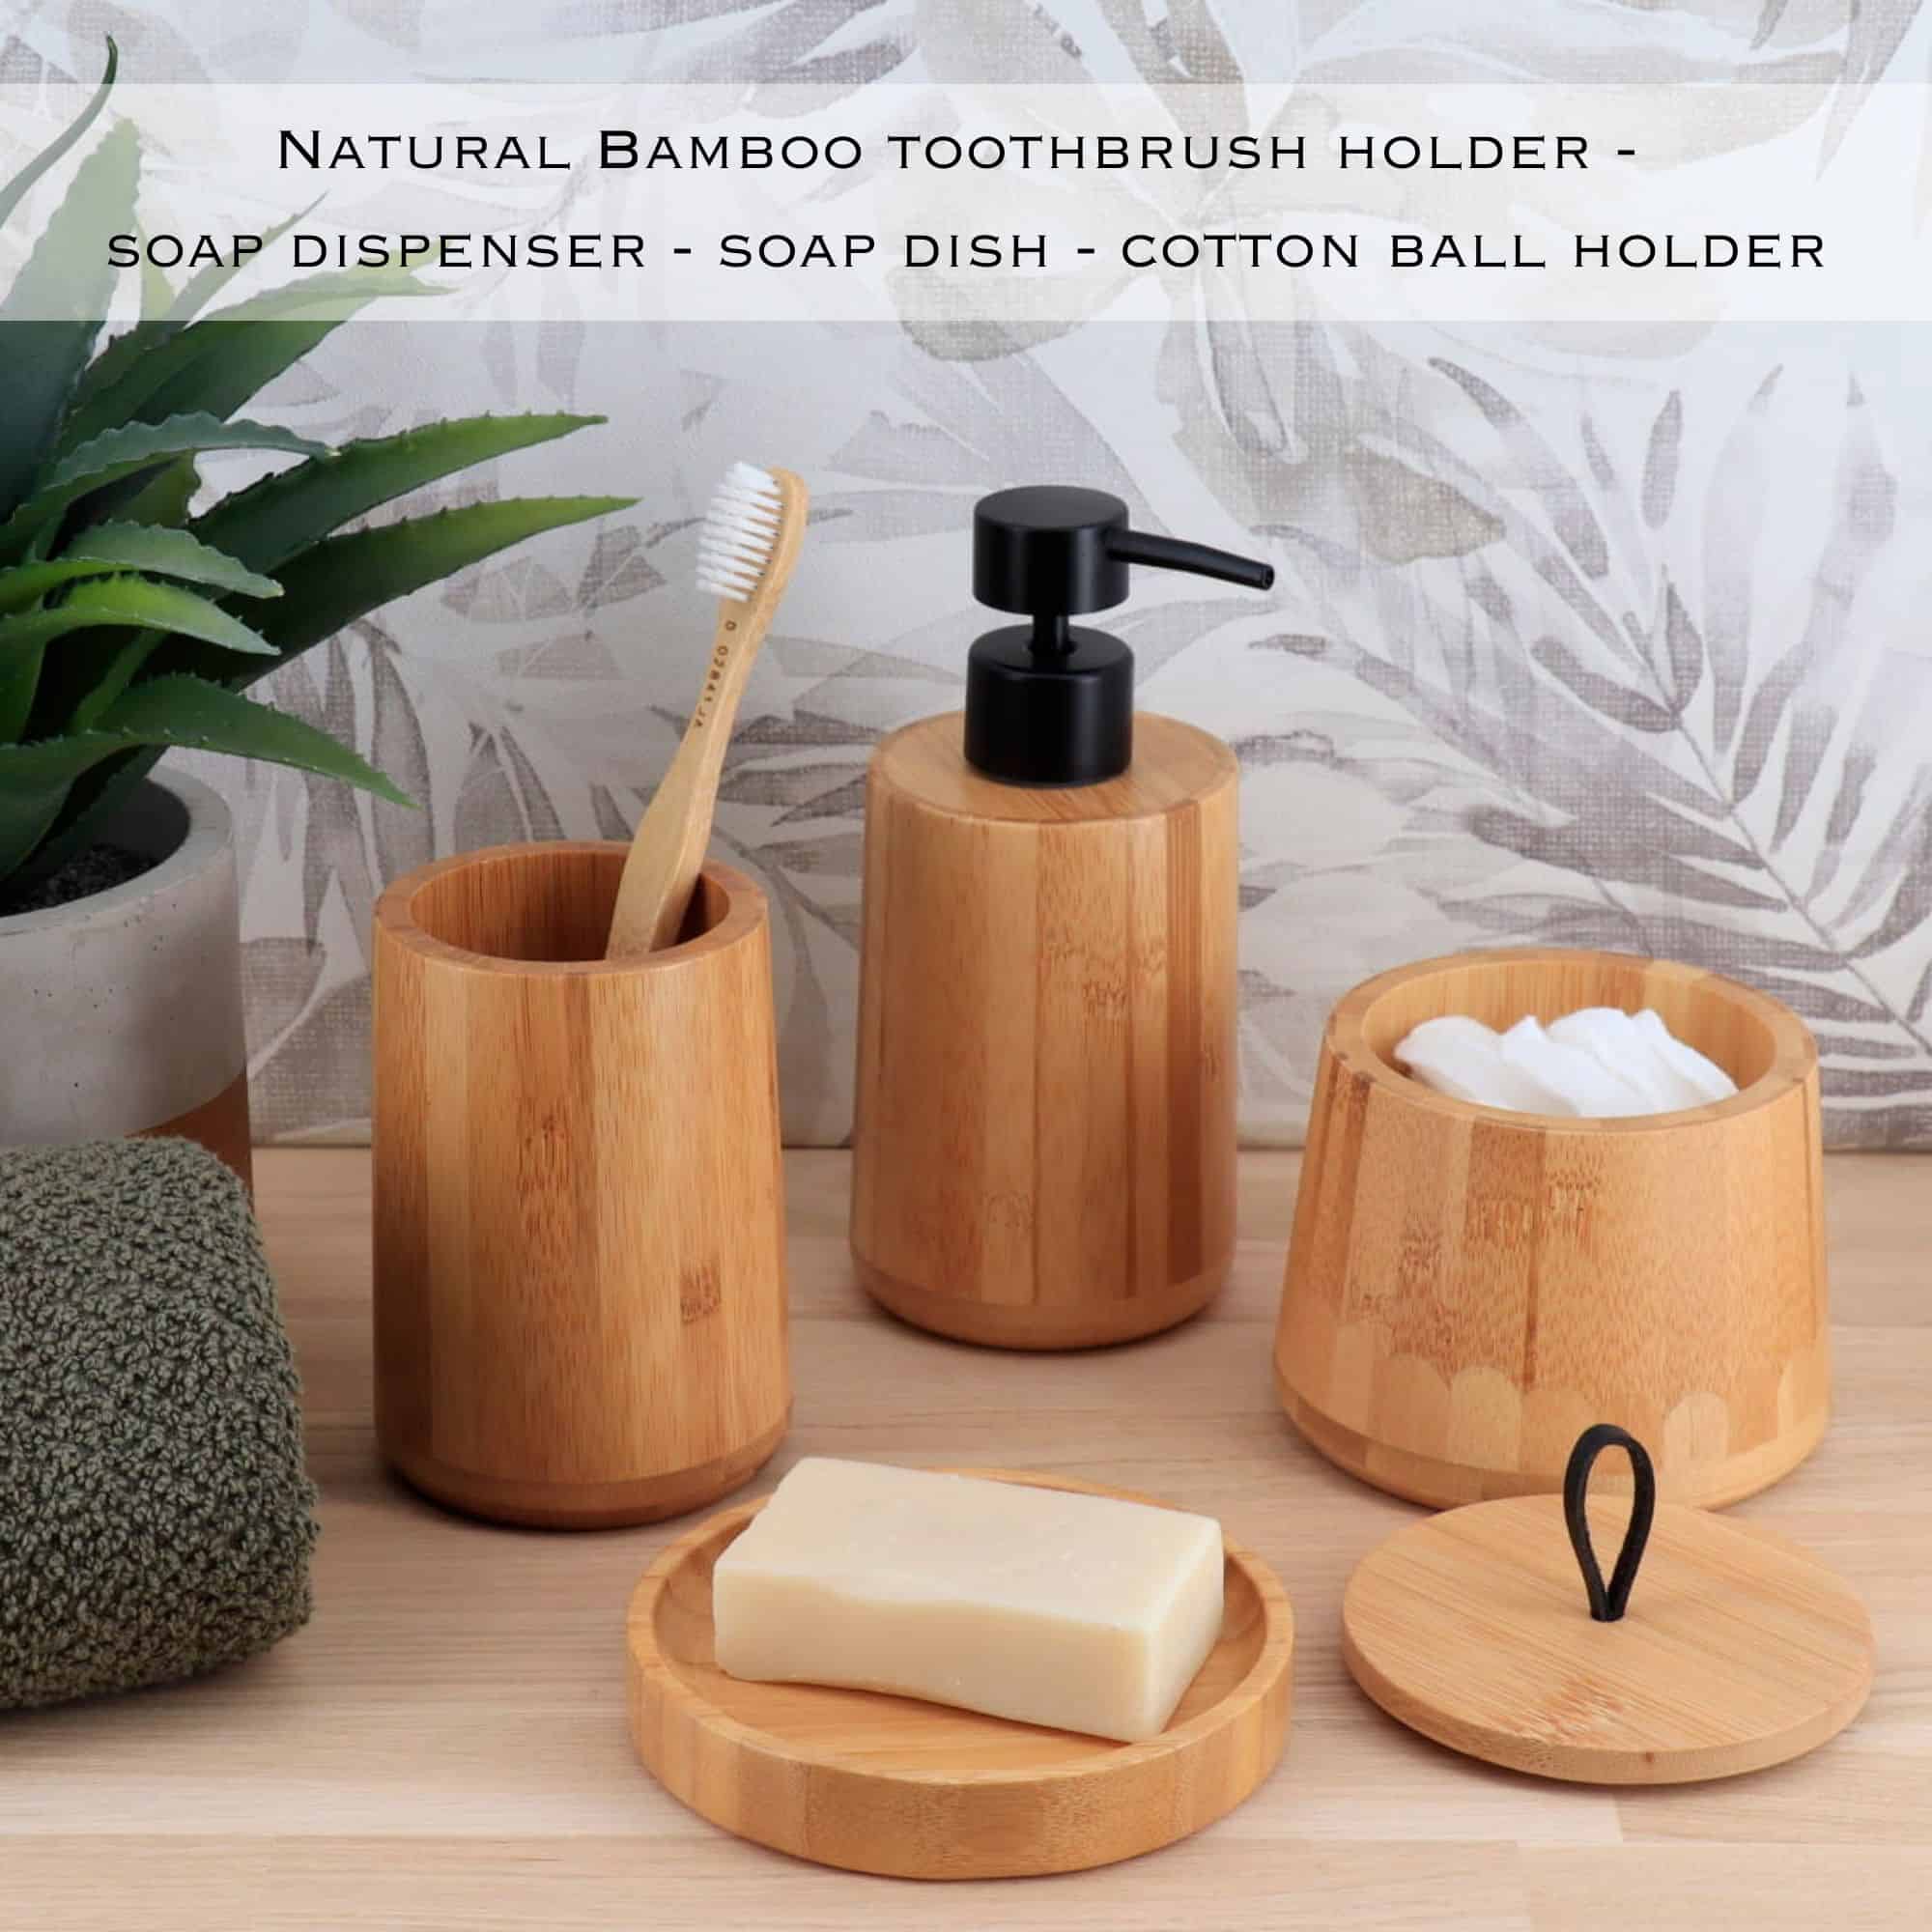 Tumbler cup, soap dispenser, soap dish and cotton ball holder on a countertop